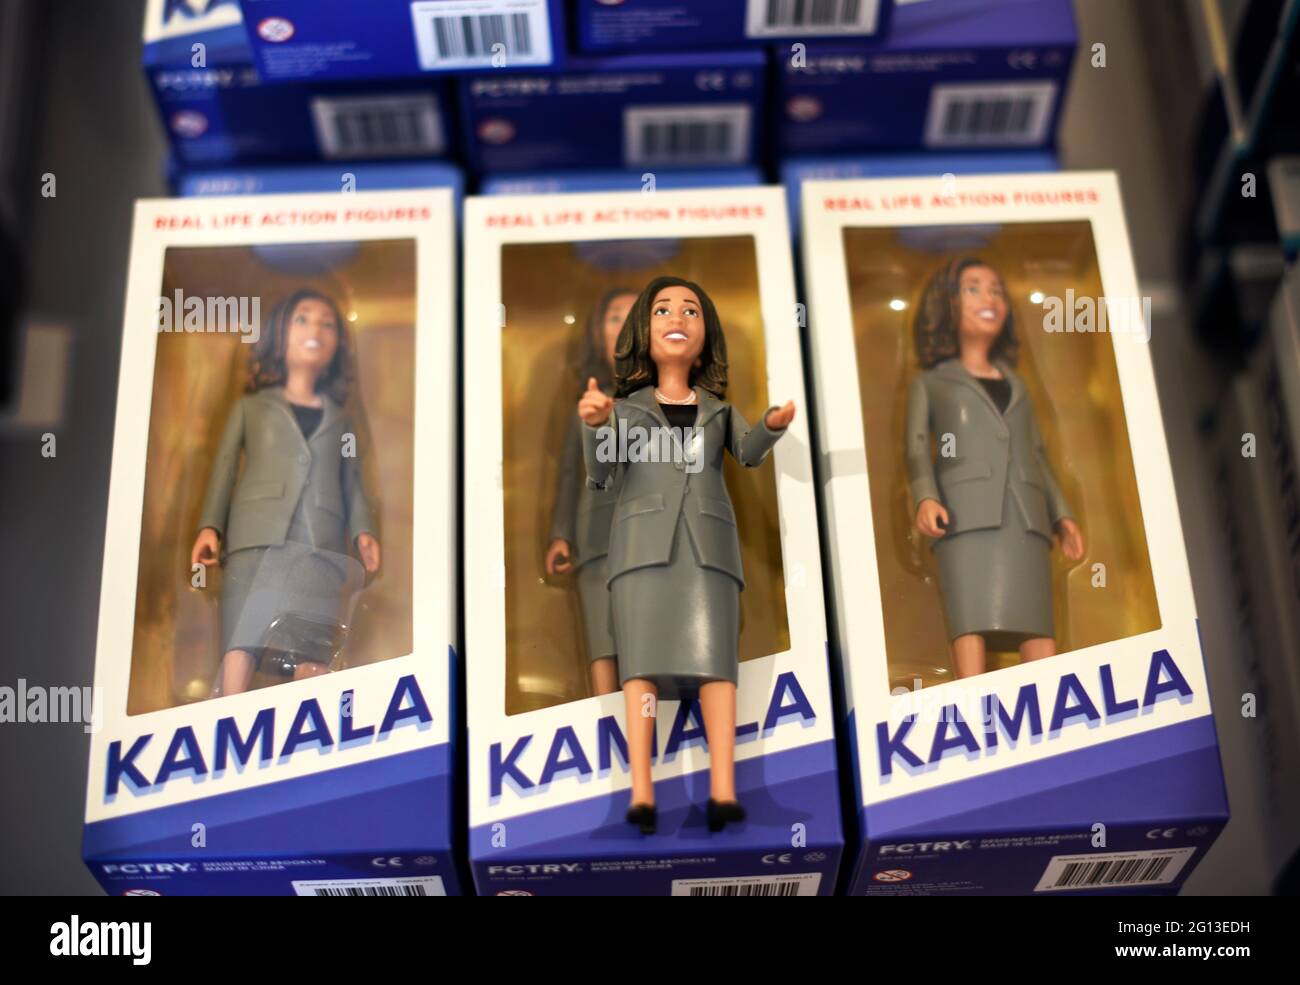 U.S. Vice President Kamala Harris action figures for sale in a store in New Mexico. Stock Photo